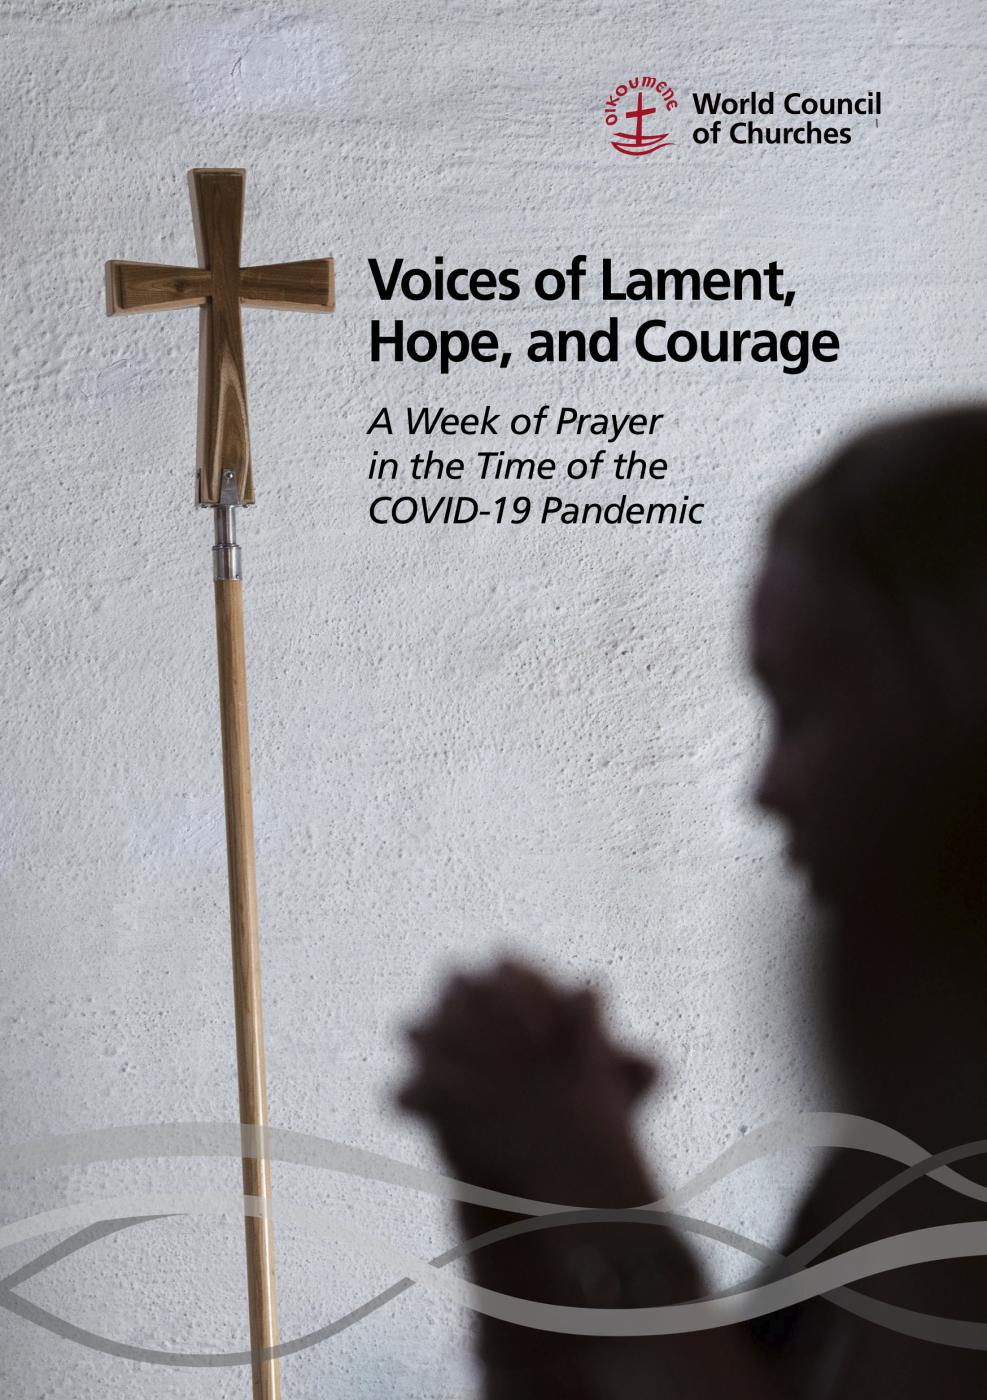 Cover of the WCC publication "Voices of Lament, Hope and Courage"